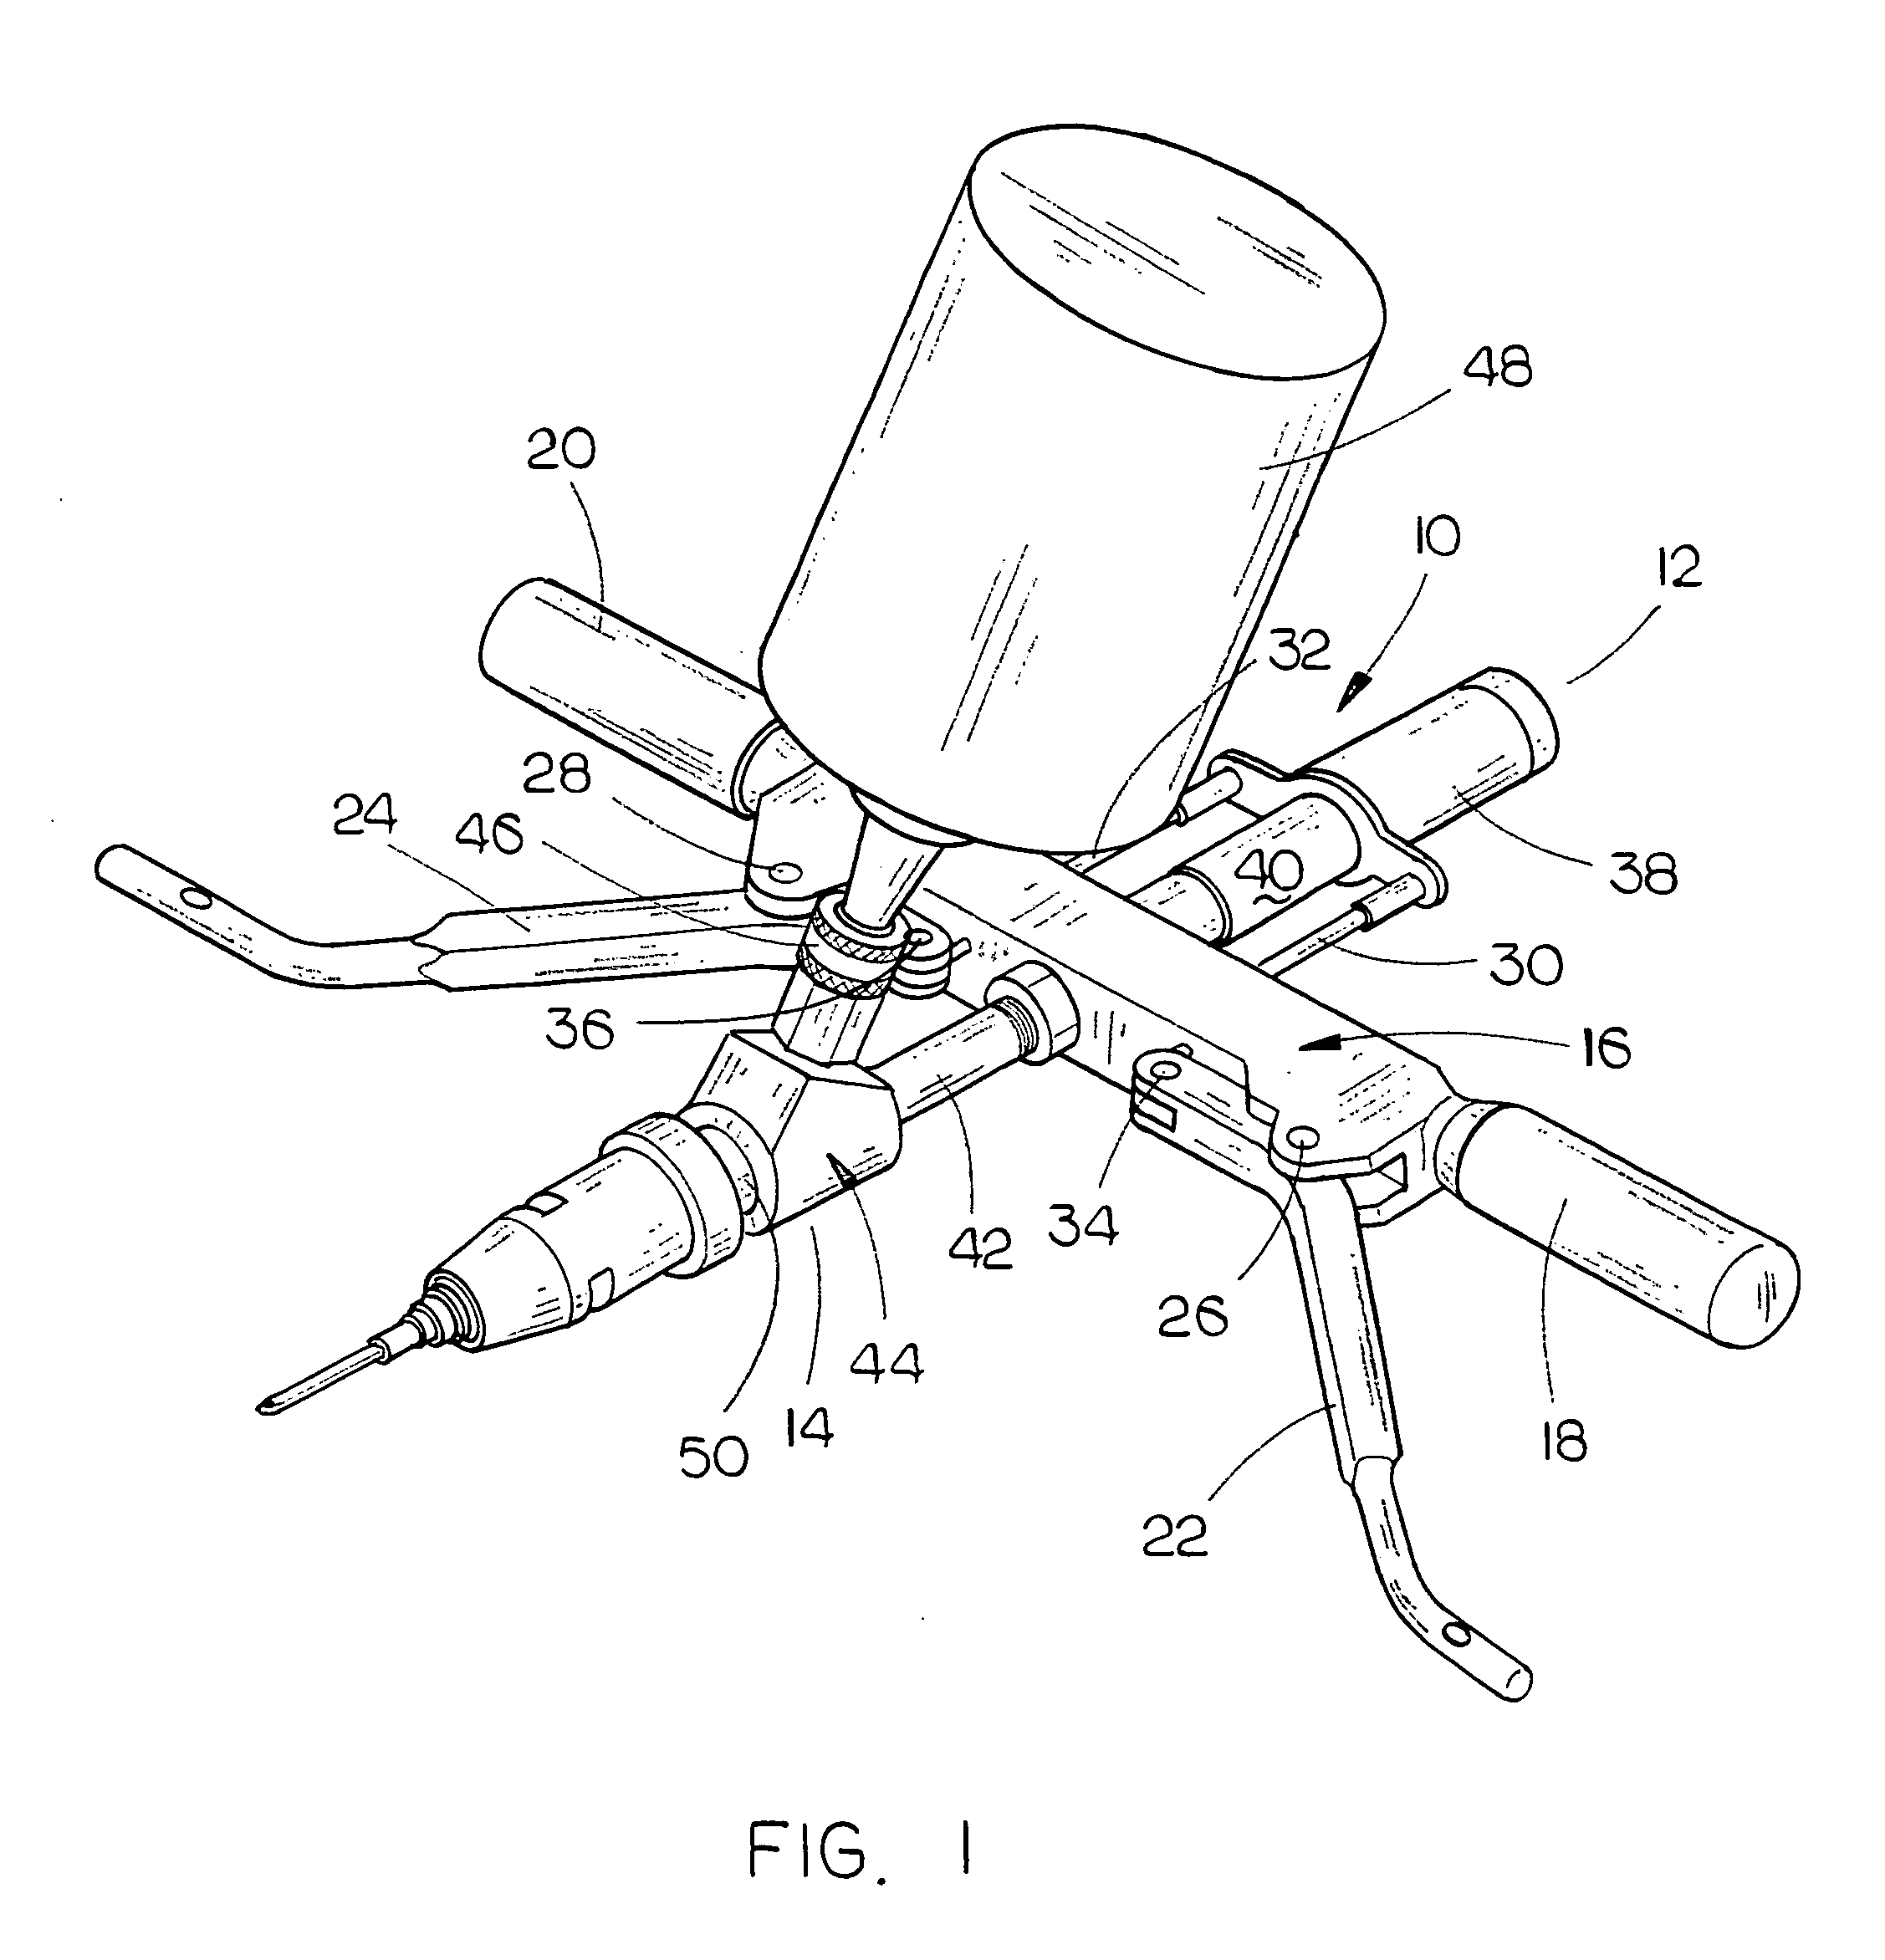 Injection tip for use with an injector for injecting liquid chemical into a tree